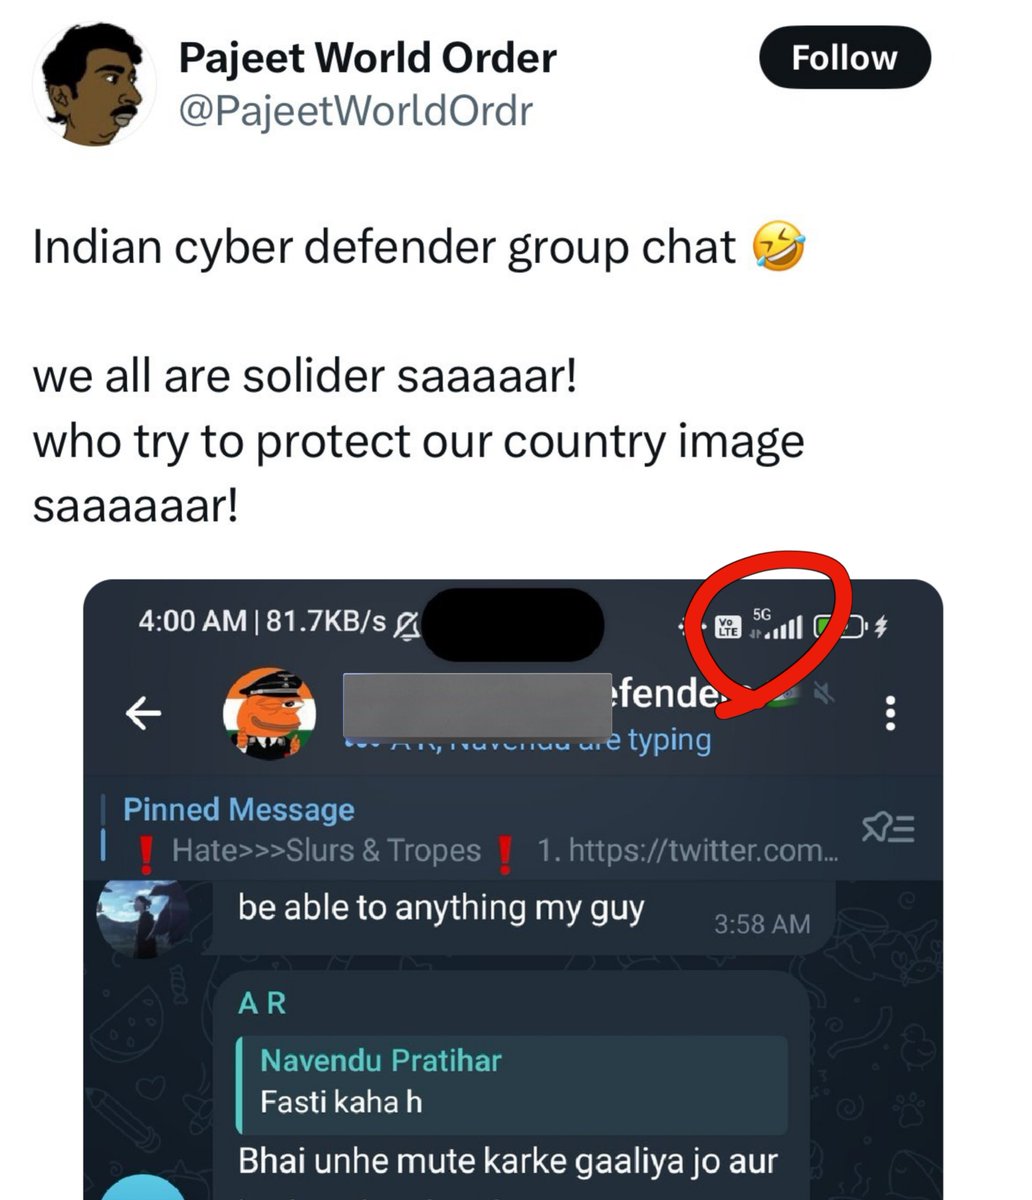 the account who created those poop AI images and songs about Indians and made it popular turns out to be another Indian mujéet. im saying it agen, the majority of the hate Indian hindus gets on socialmedia comes from their own country.